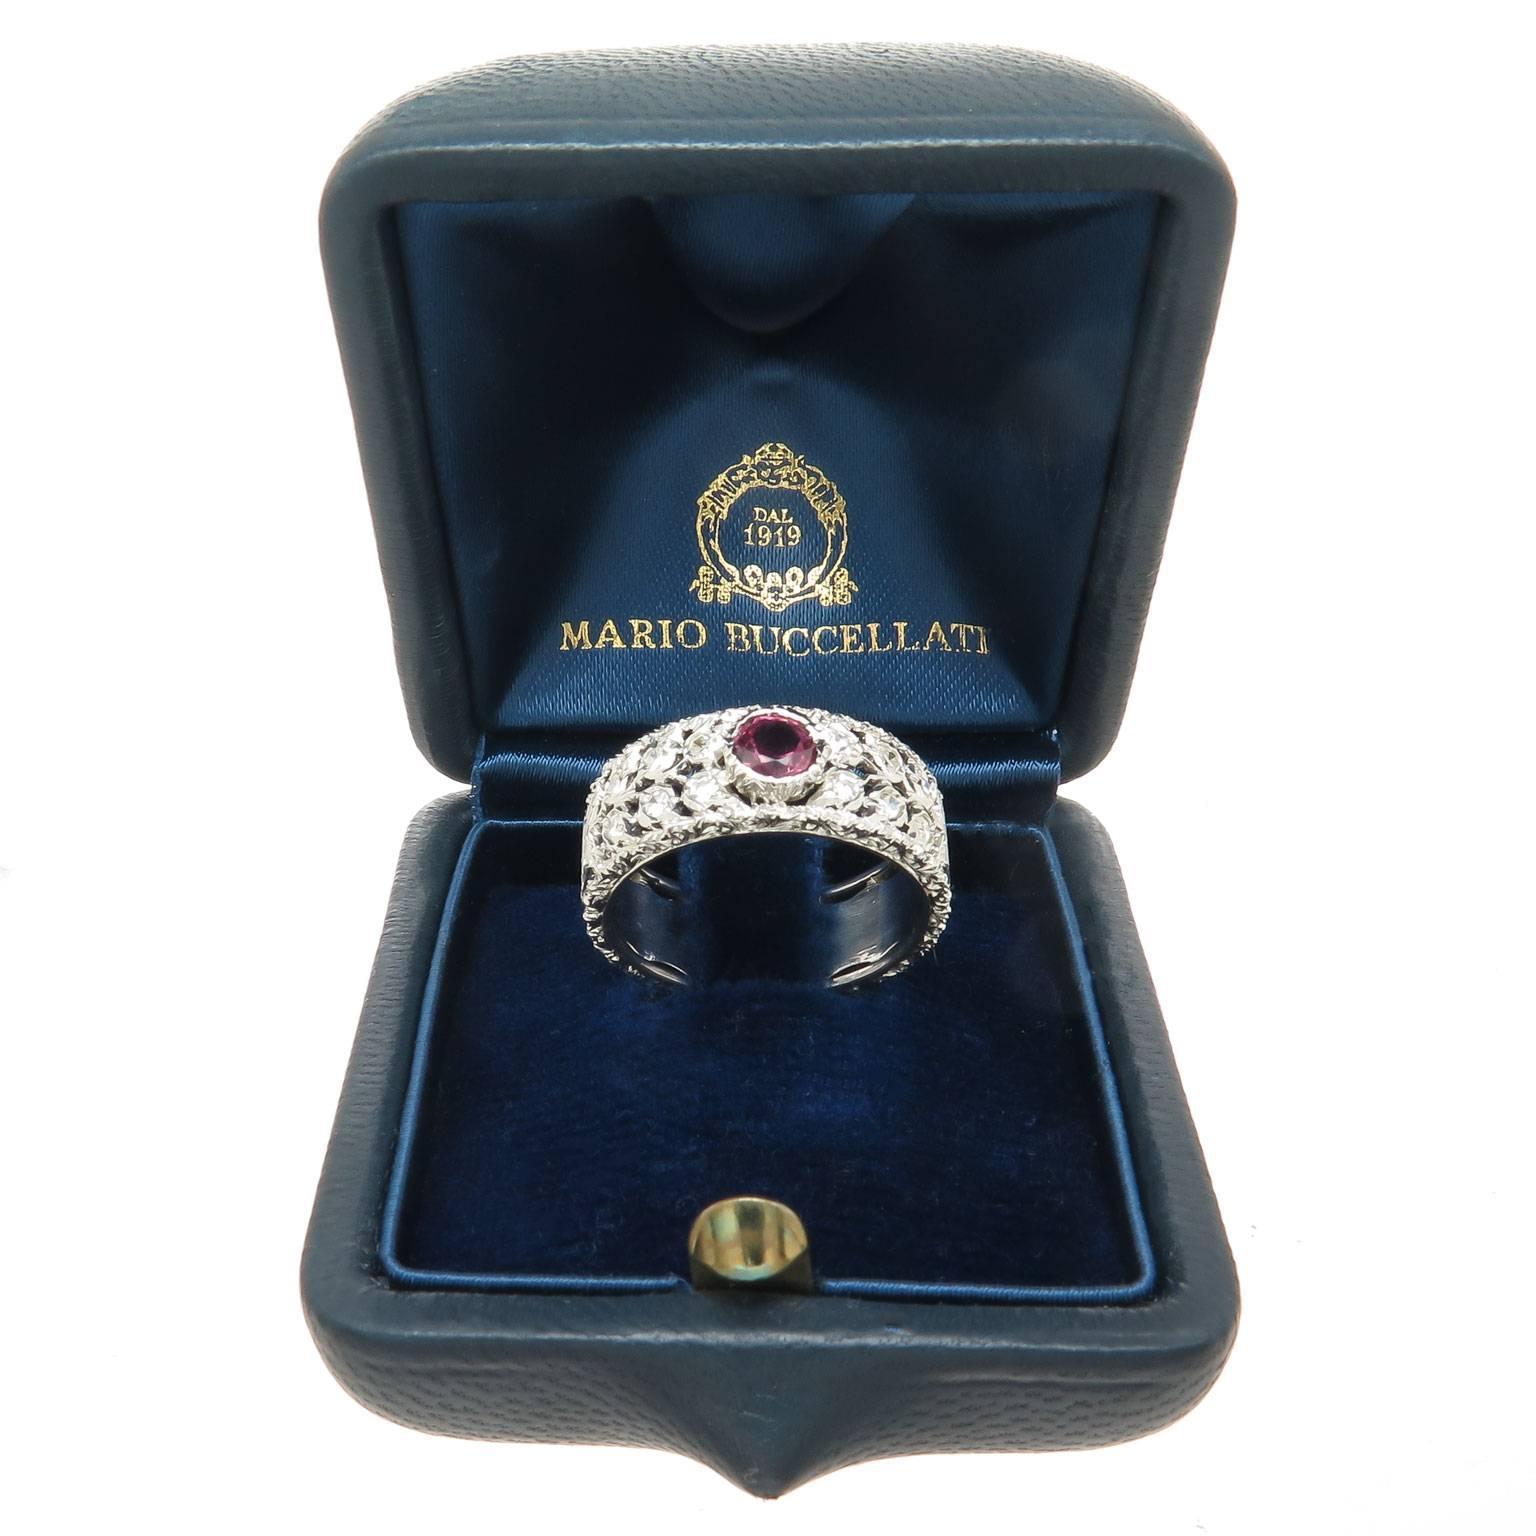 Mario Buccellati 18K White Gold Band Ring measuring 7 MM wide and set with Diamonds and a very Fine Color Ruby being approximately 1/2 Carat, further decorated in the famous Buccellati hand engraved fashion. Finger size = 7. Comes in the Original